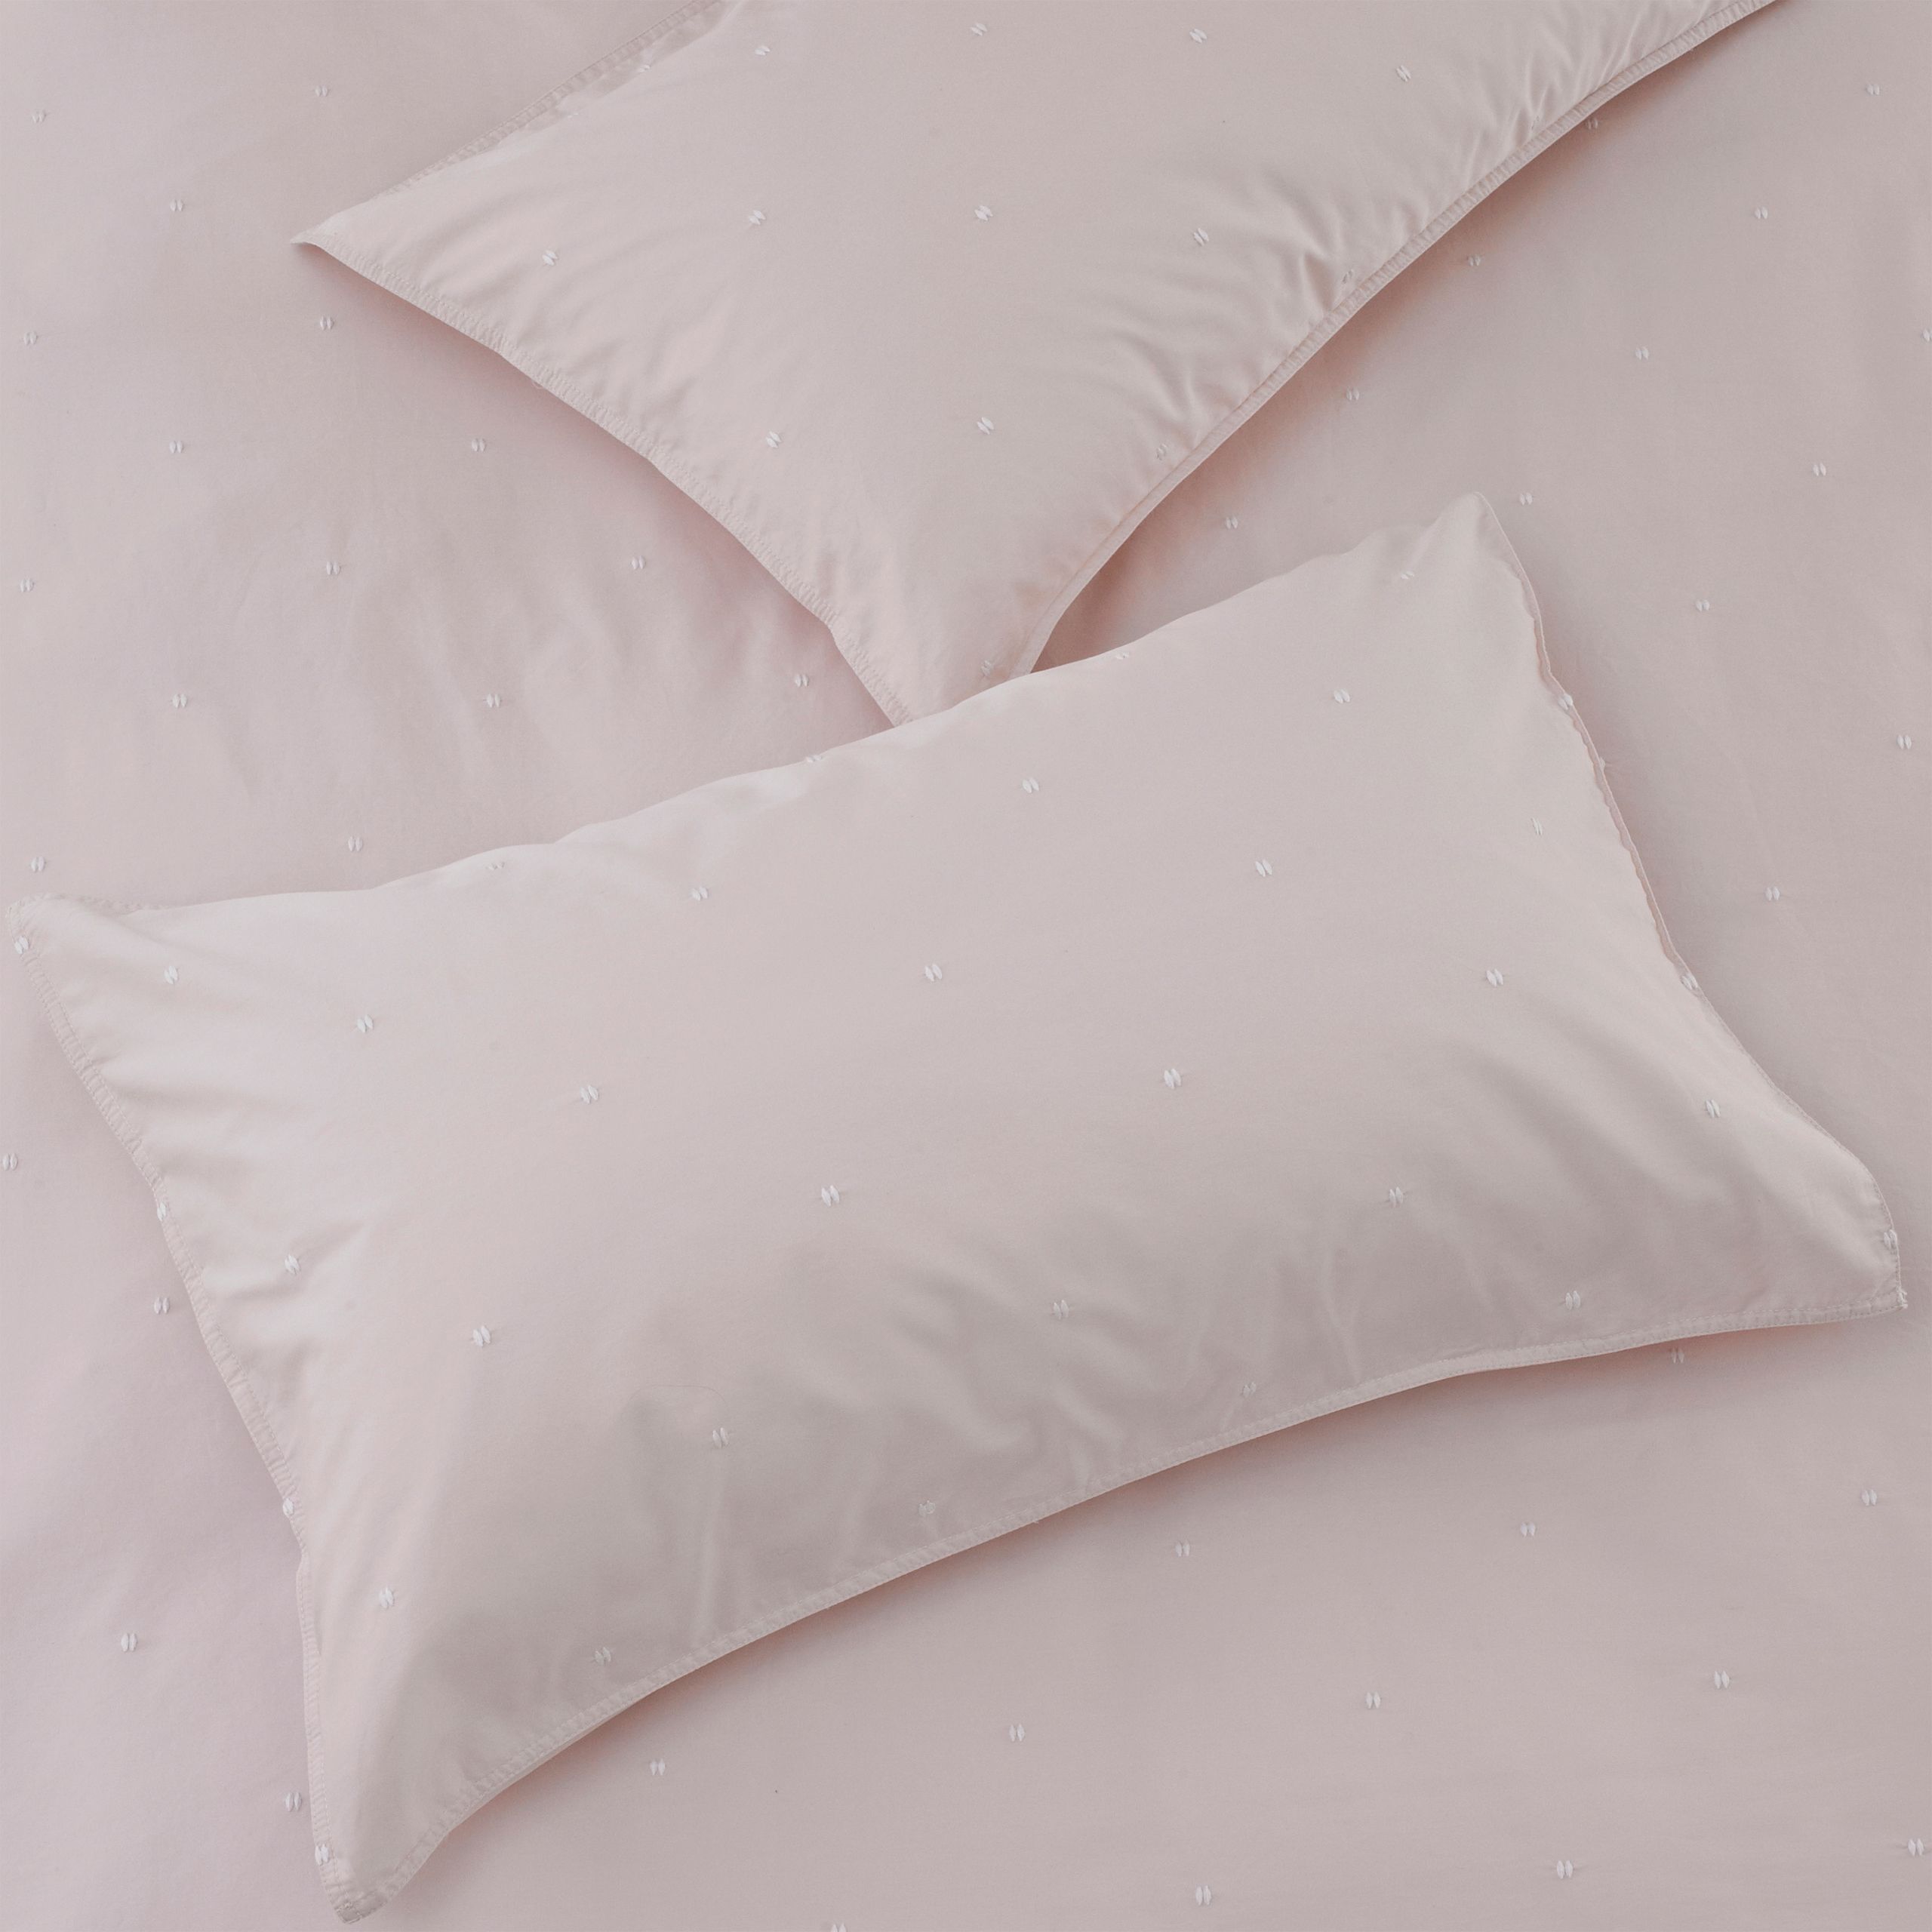 Add a fresh look to your interior with this washed cotton design that features an emboirdered stitch detailing. This pillowcase set is the perfect addition to any contemporary home.